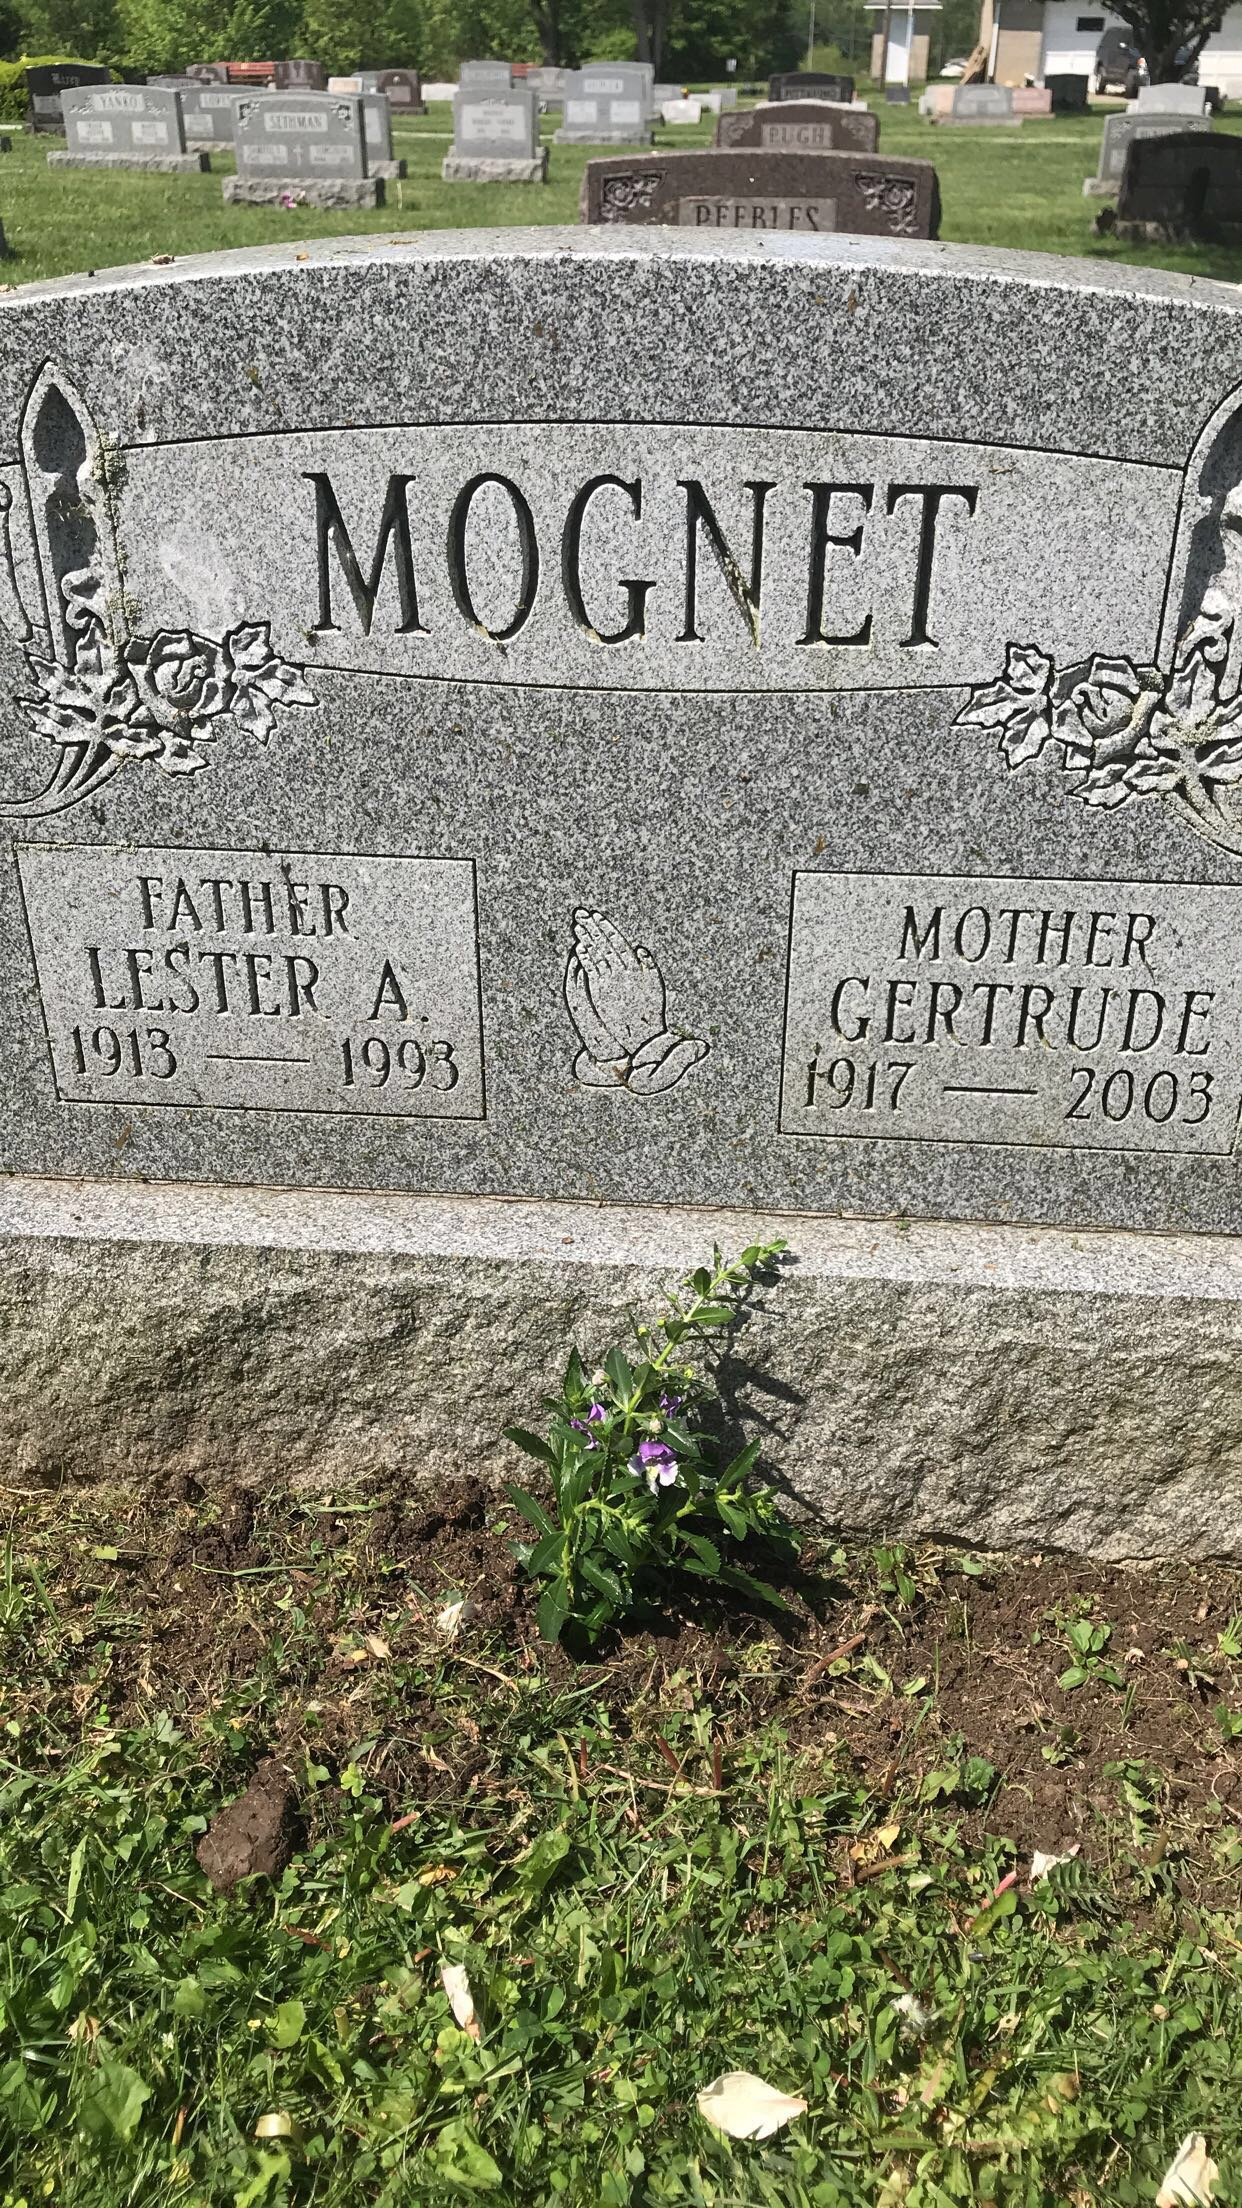 Lester A. and Gertrude Mognet Gravesite